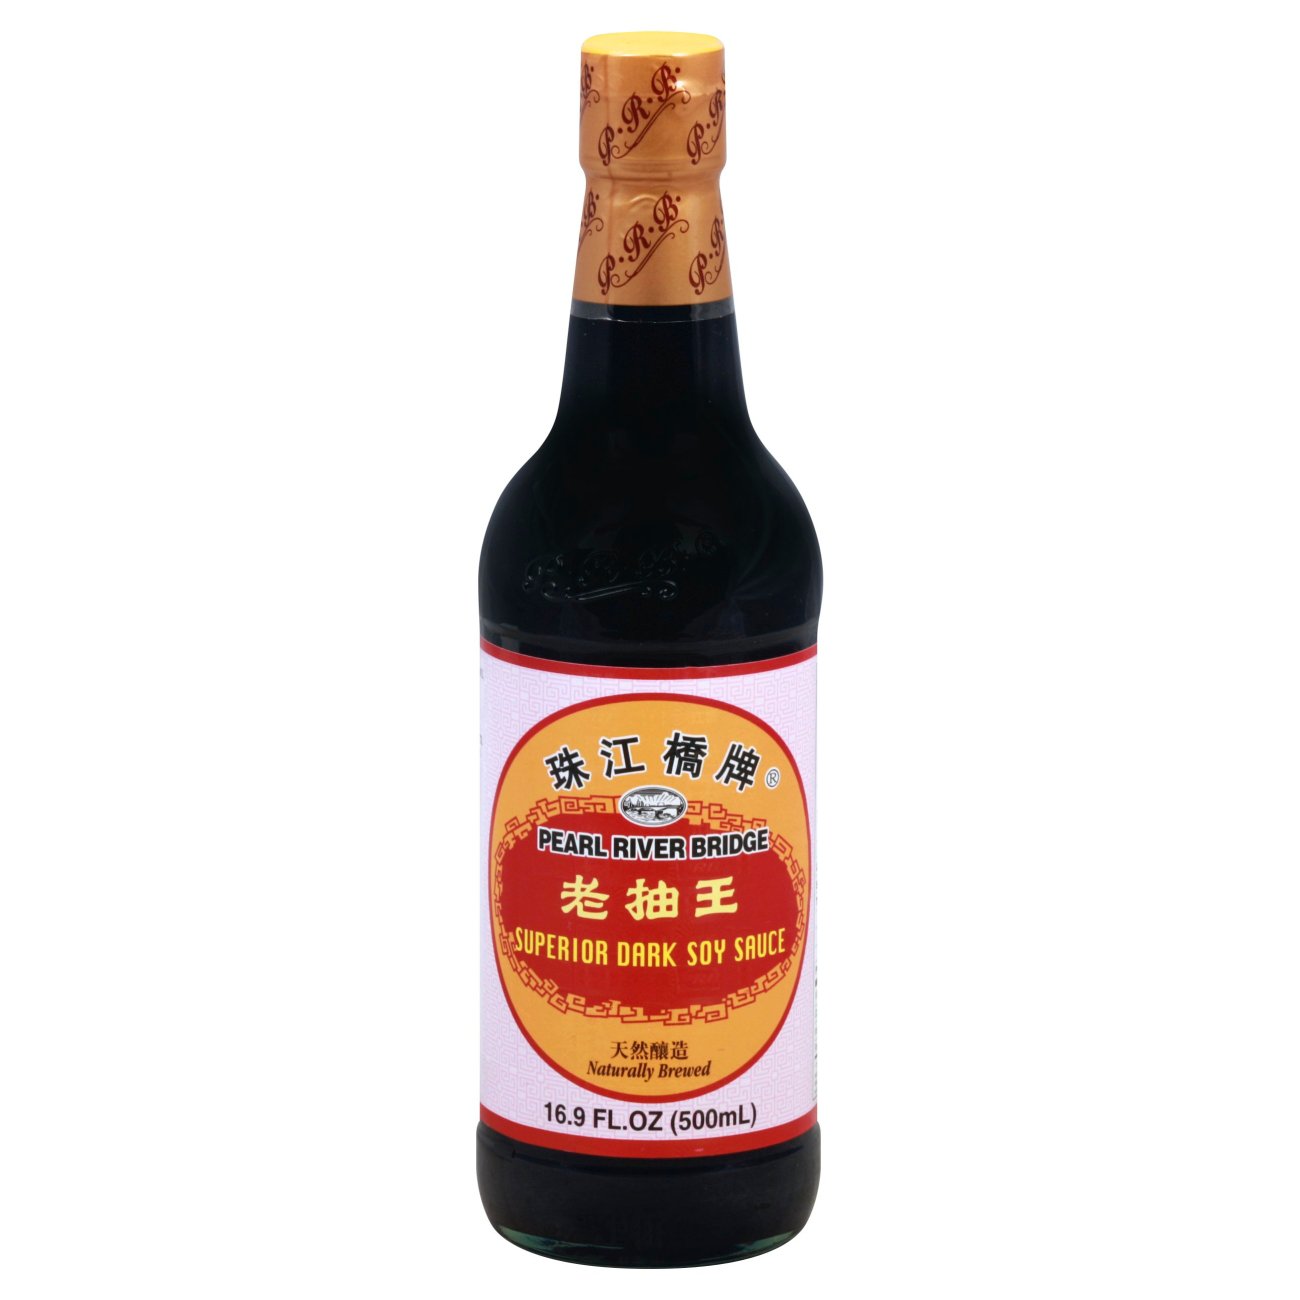 Pearl River Bridge Superior Dark Soy Sauce Shop Soy Sauces At H E B,Building A Tiny House